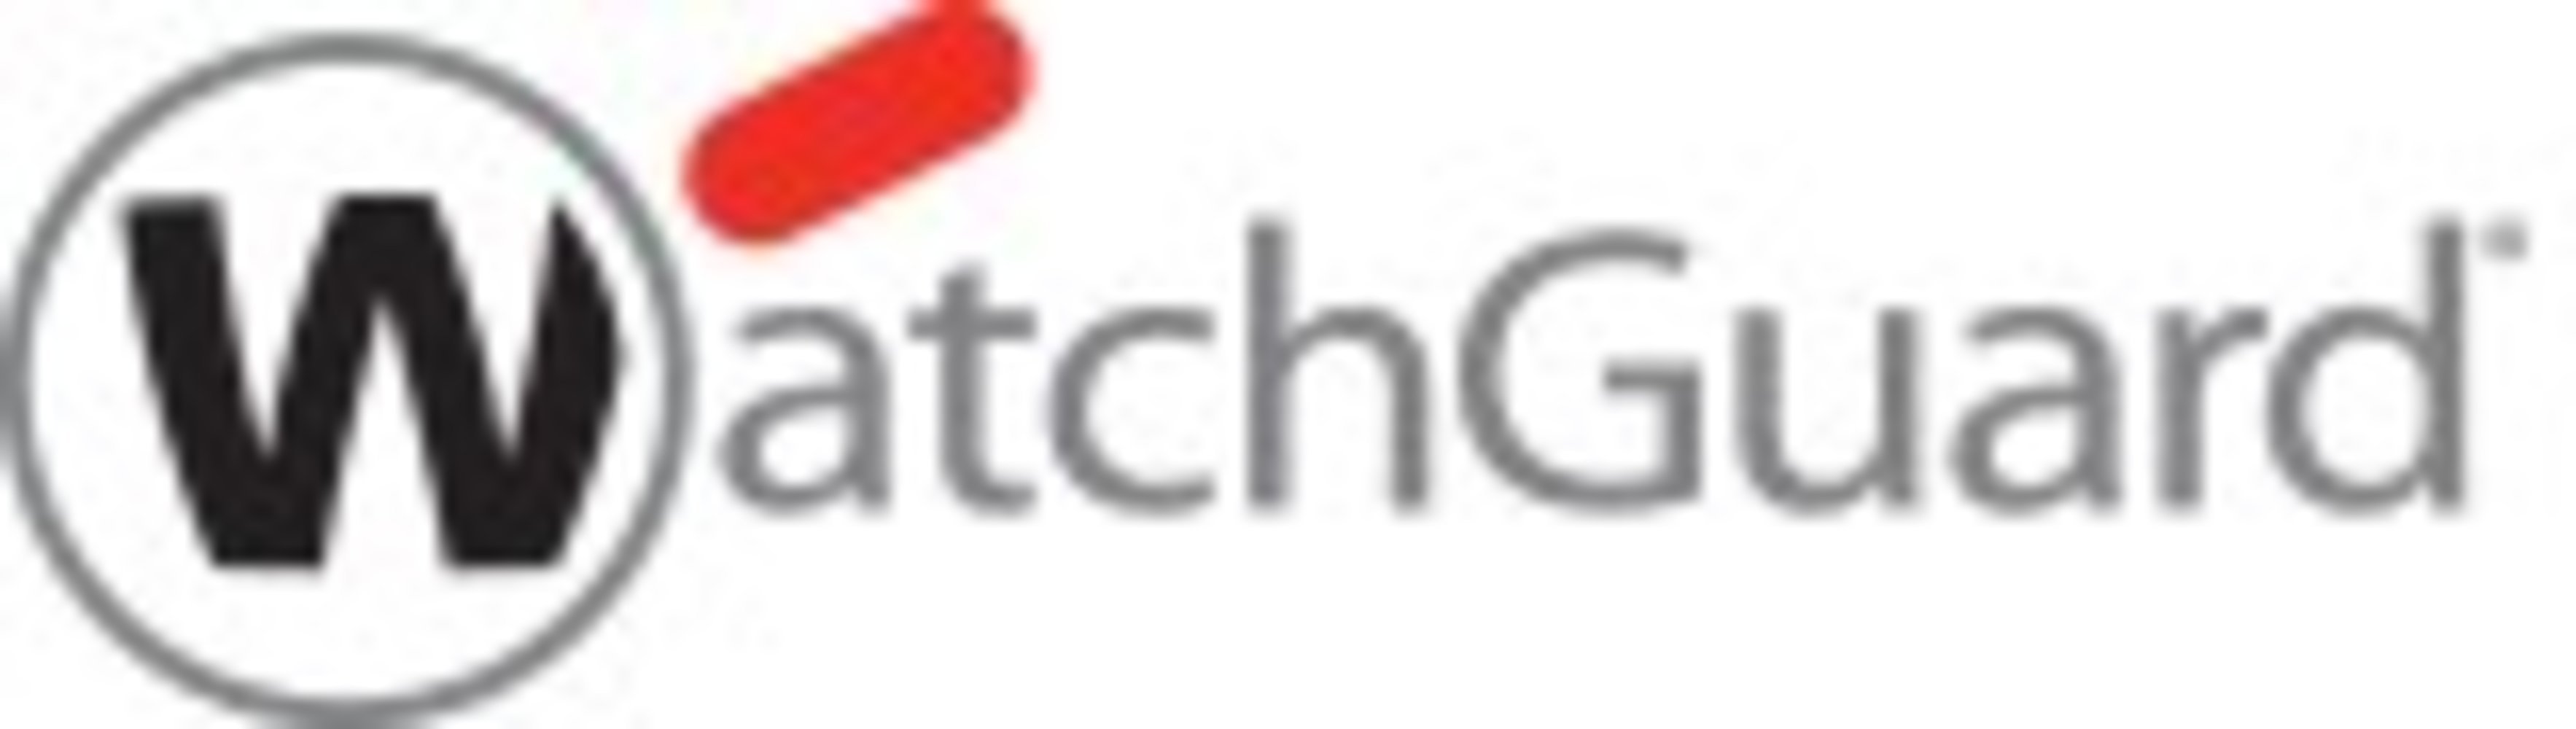 WatchGuard Firebox V Large zbh WatchGuard Total Security Suite Renewal/Upgrade 3-yr for FireboxV Large